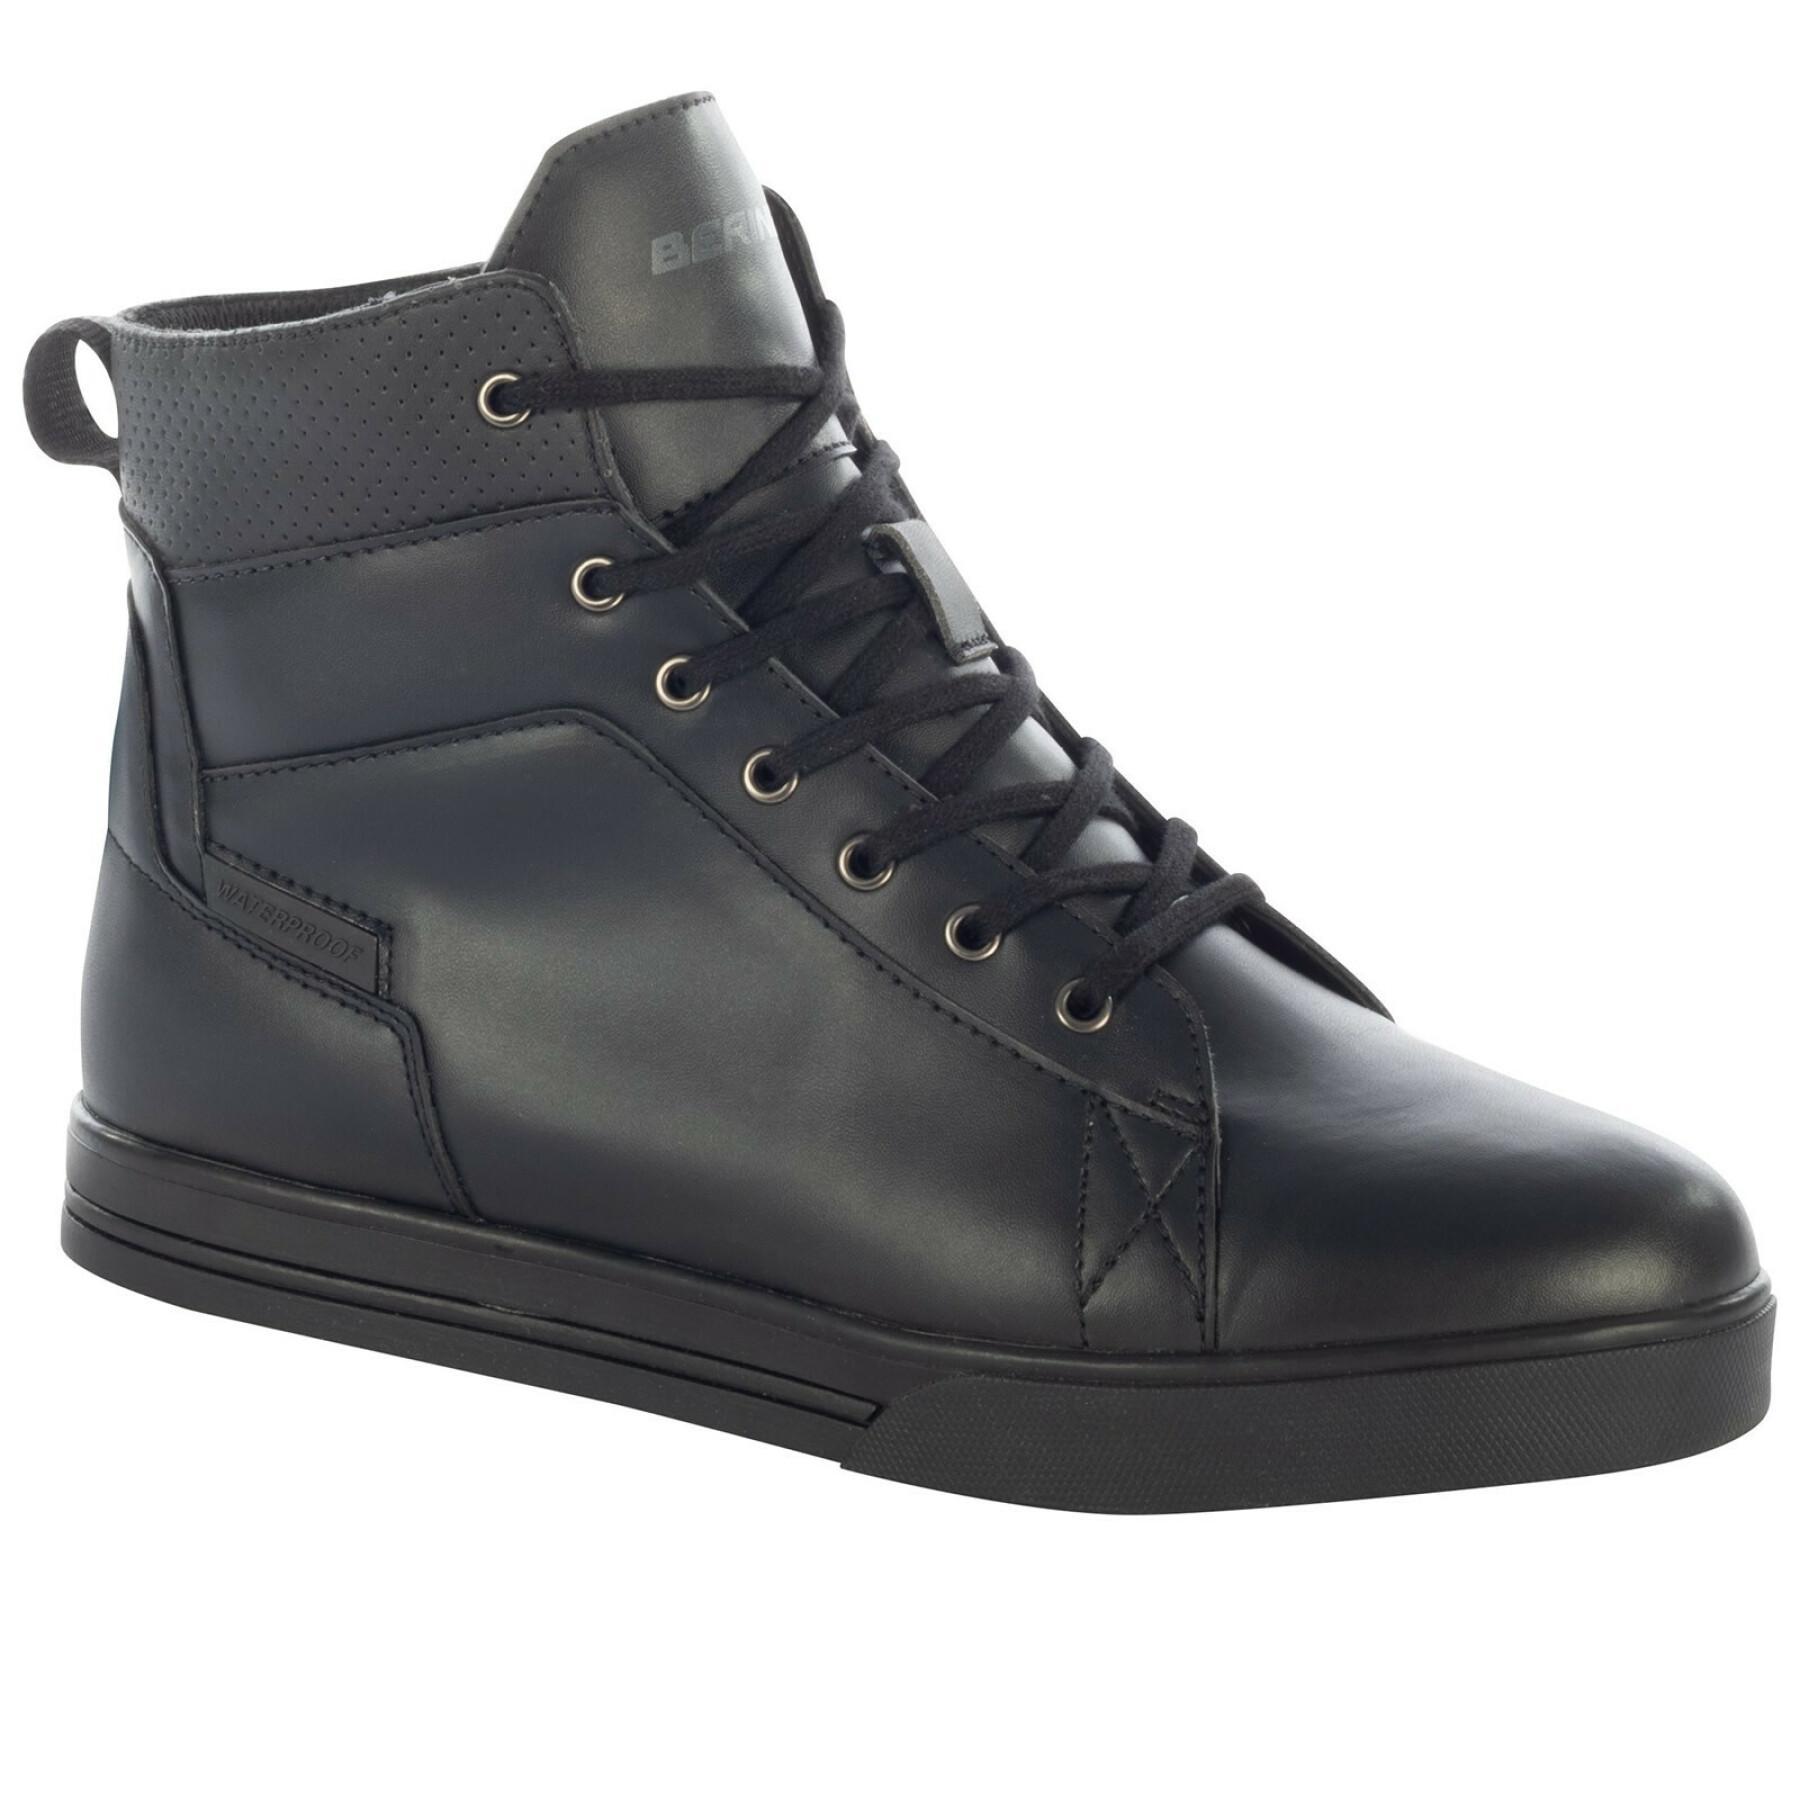 Chaussures moto Bering Indy